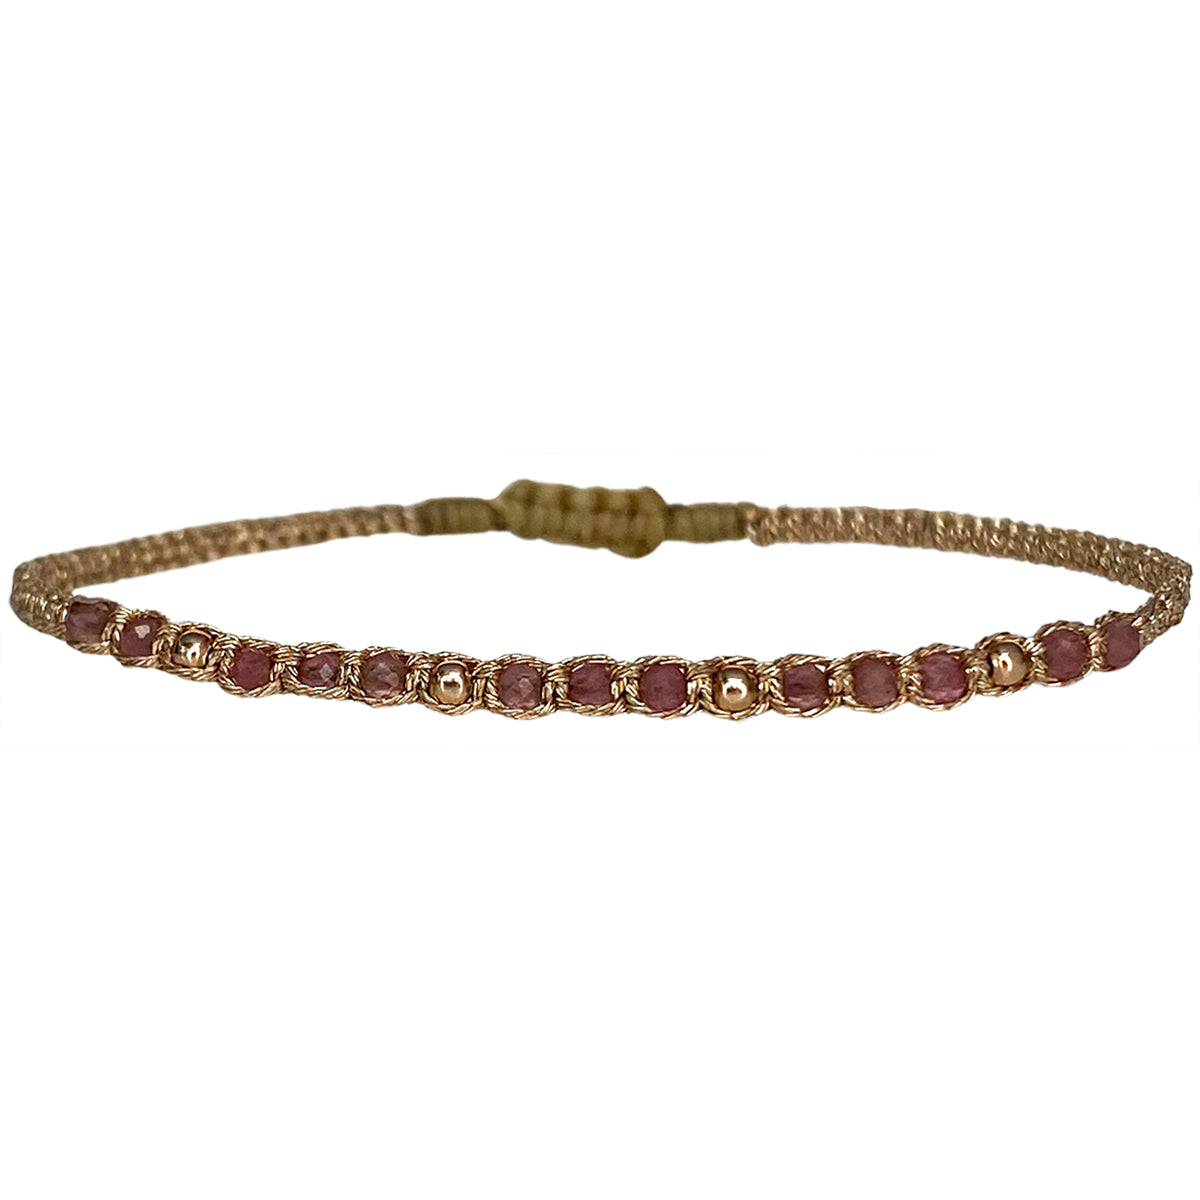 ook for the perfect balance of modern and classic with this elegant handmade bracelet.  It is handwoven by our team of artisans using 14k rose gold filled beads, pink tourmaline stones and metallic threads.  Details:  - 14k rose gold filled beads details   -Pink tourmaline stones  - Silver metallic threads  -Adjustable bracelet  -Width: 2mm